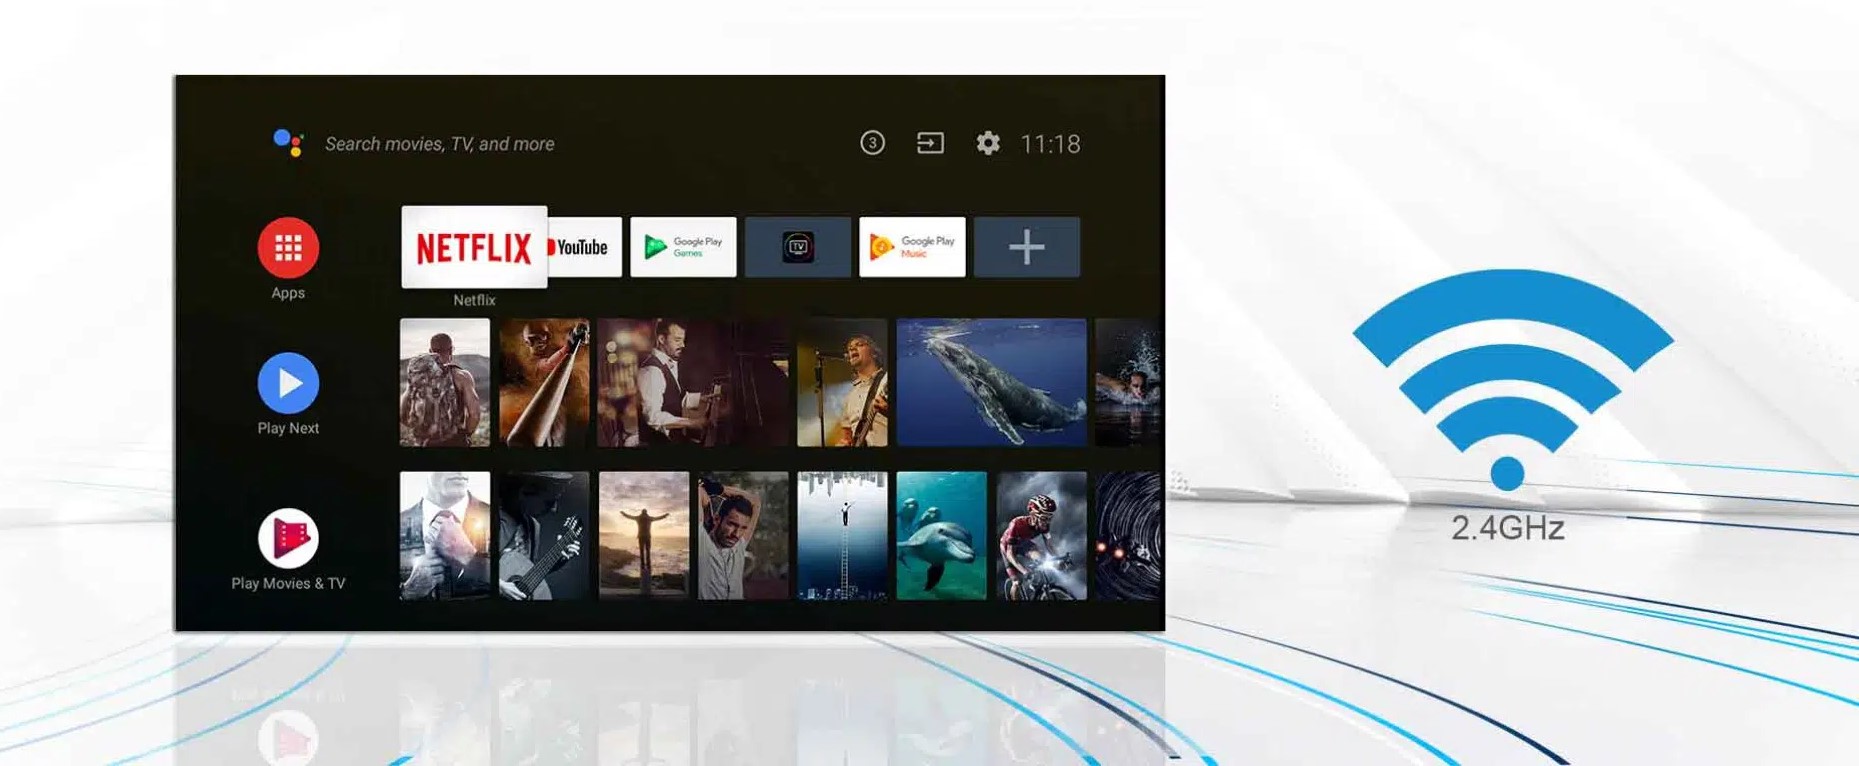 An image symbolizing Wi-Fi and Bluetooth connectivity options on the TCL S65A Series Smart Full HD AI LED Android TV.